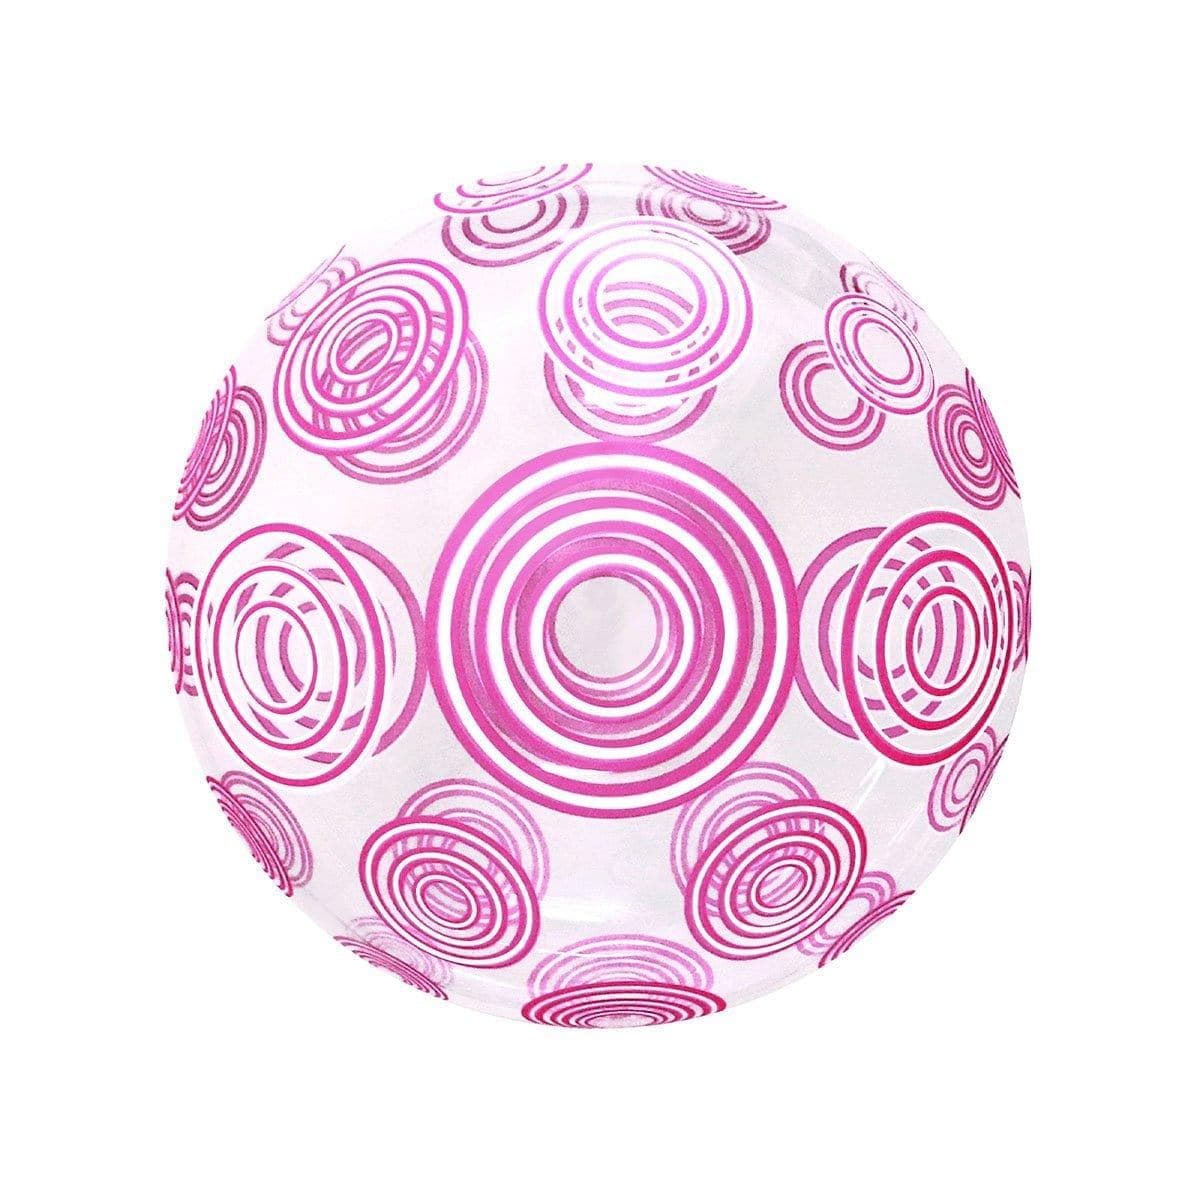 Buy Balloons HD Bubble Balloon, Pink Circles, 20 Inches sold at Party Expert